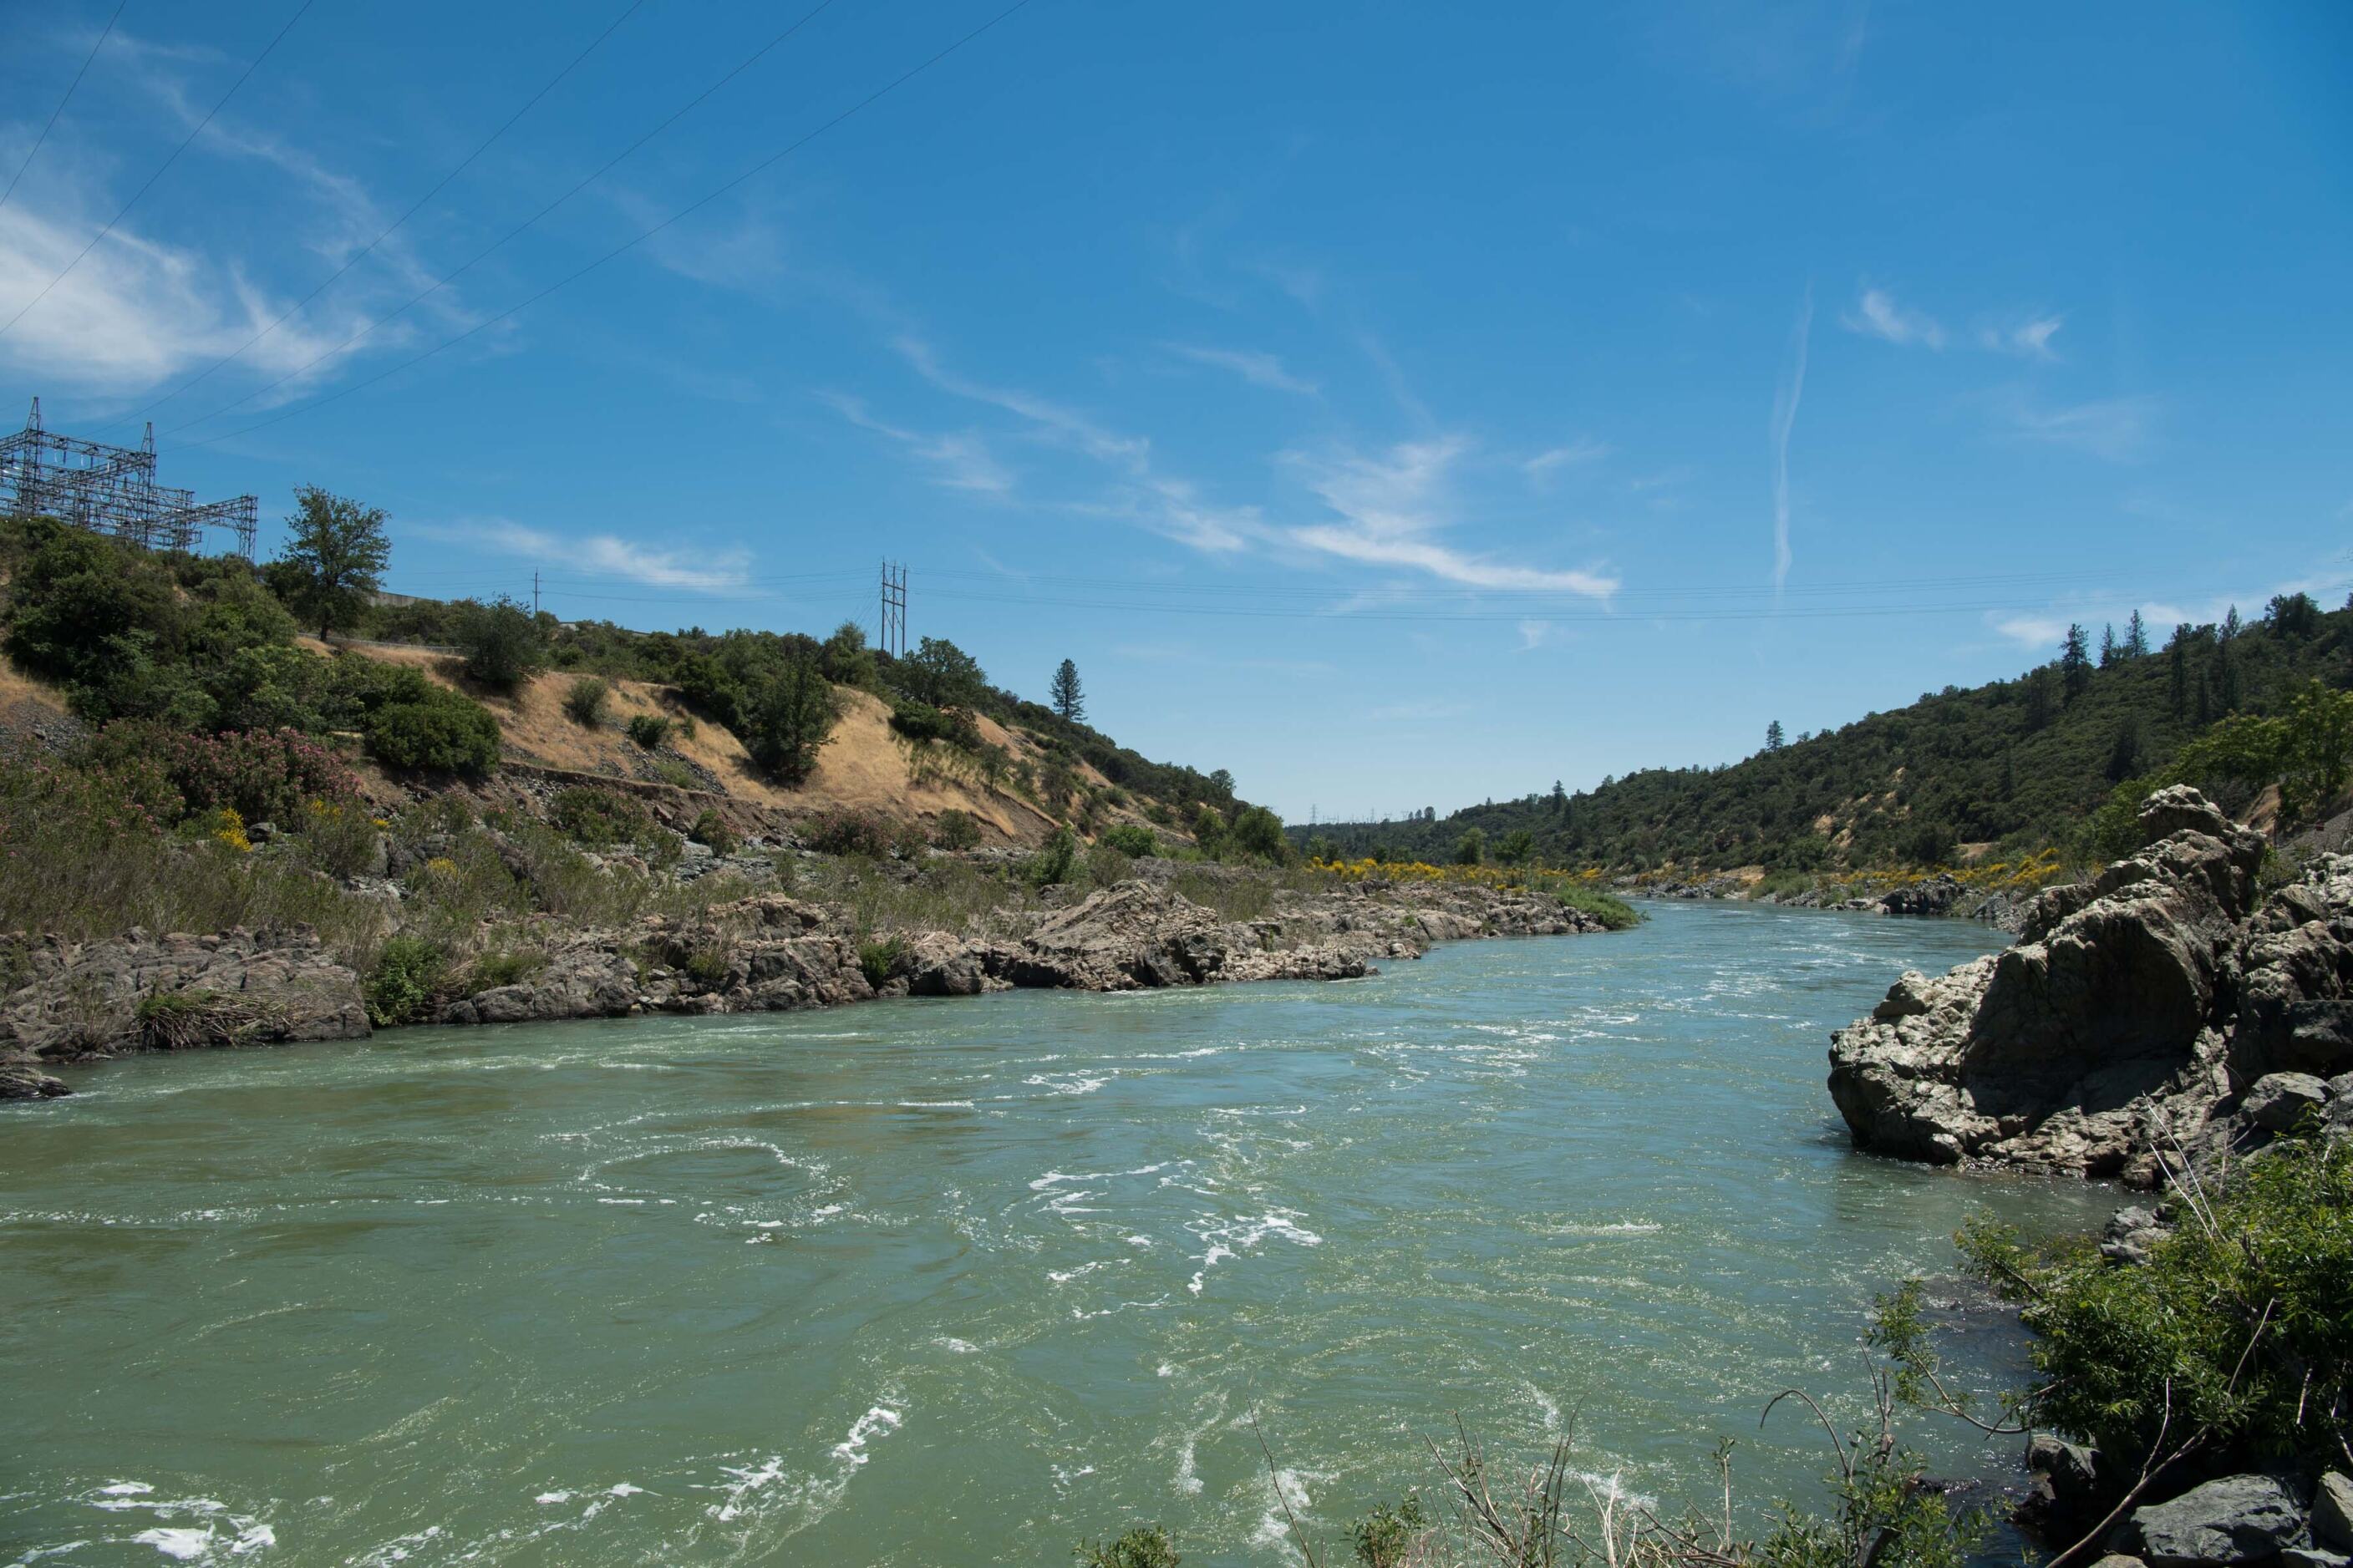 The Sacramento River running through brush and trees with high-power line towers on the hill.